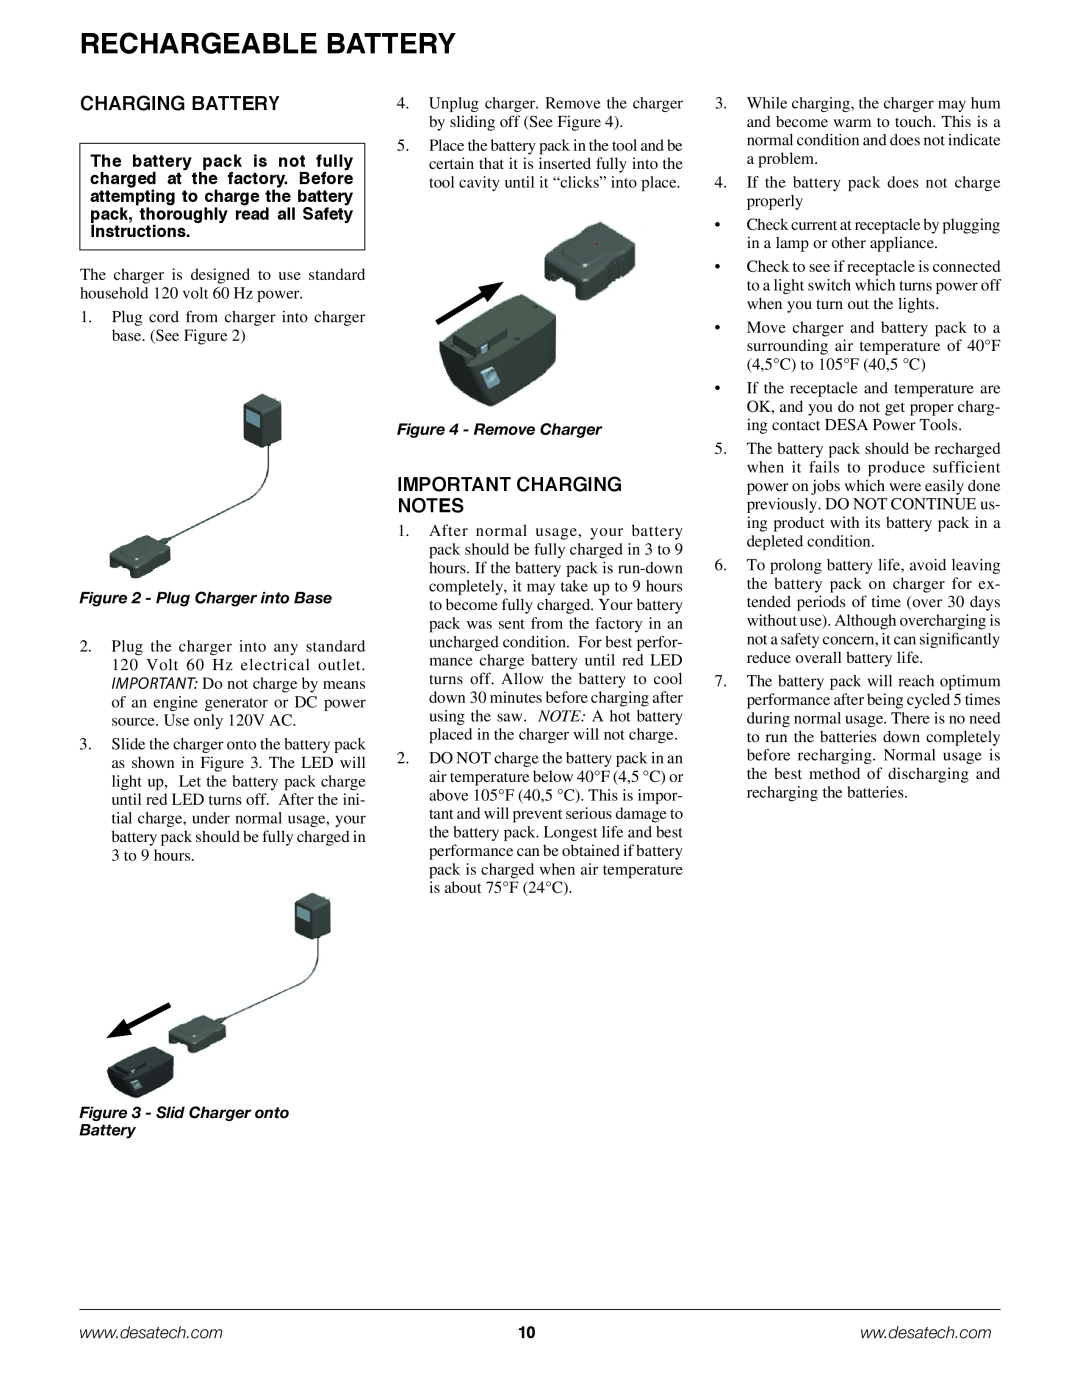 Remington Power Tools BPS188A, BS188A owner manual Rechargeable Battery, Charging Battery, Important Charging Notes 